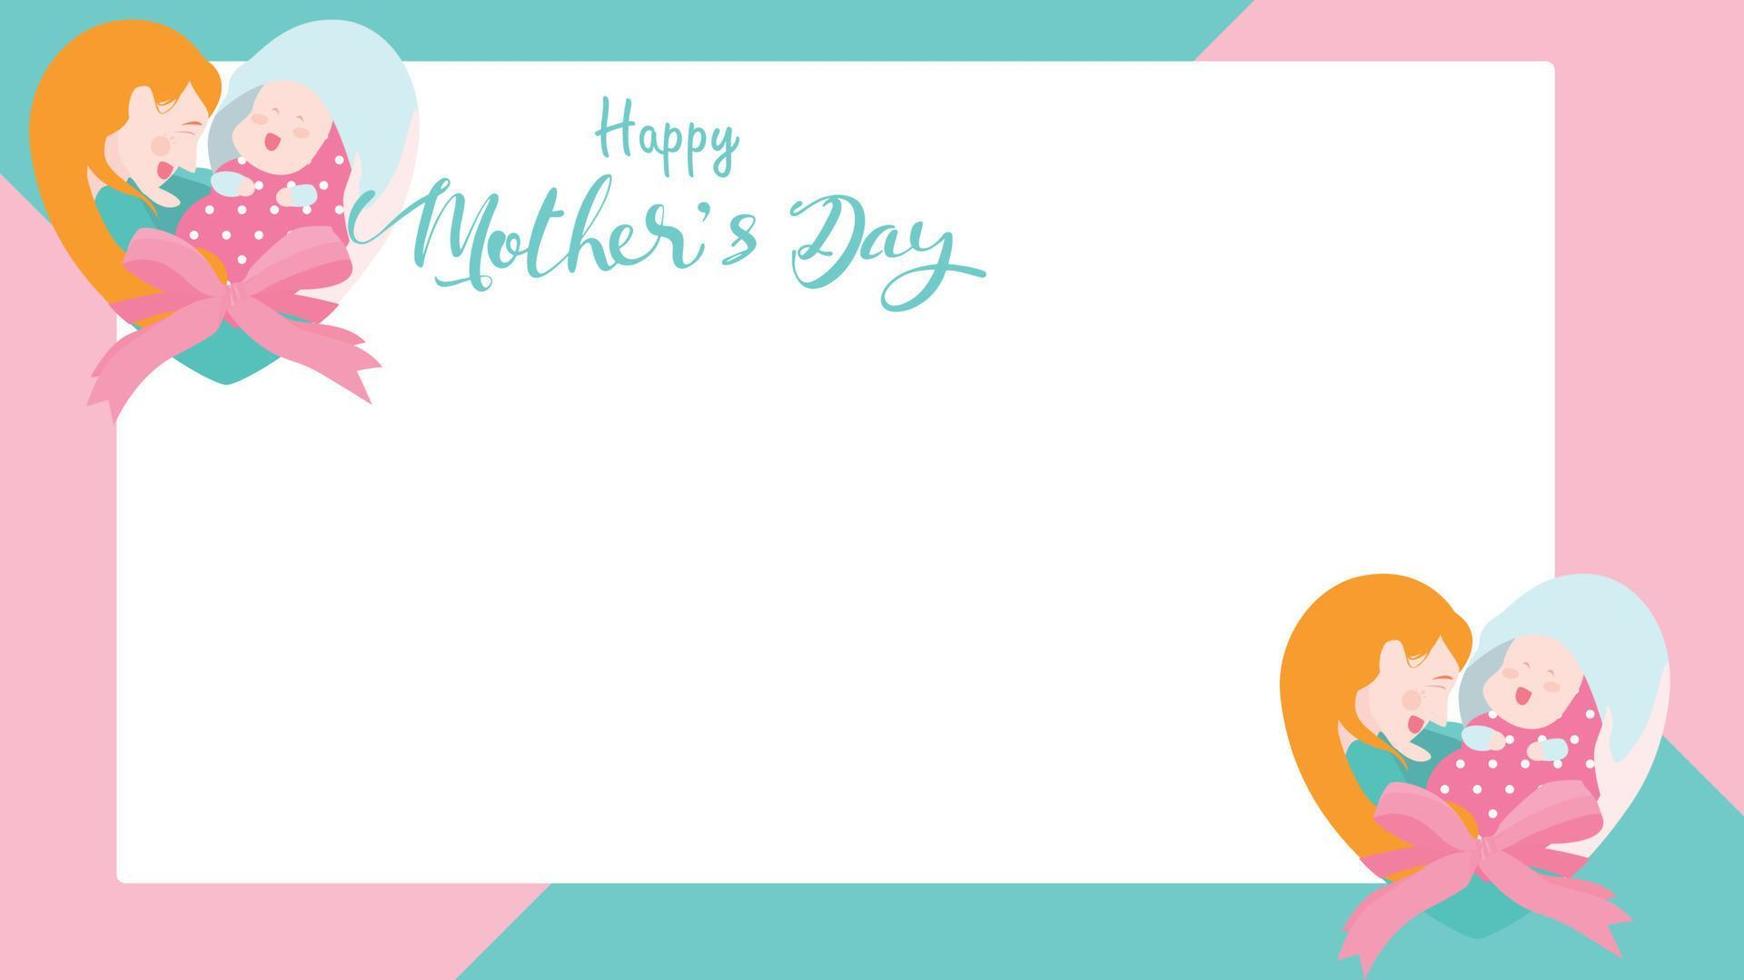 Happy mother's day banner. Mum laughing, smiling, holding and hugging her baby with forming of heart shape or love symbol. Colorful vector illustration flat design style. Copy space for text. - vector